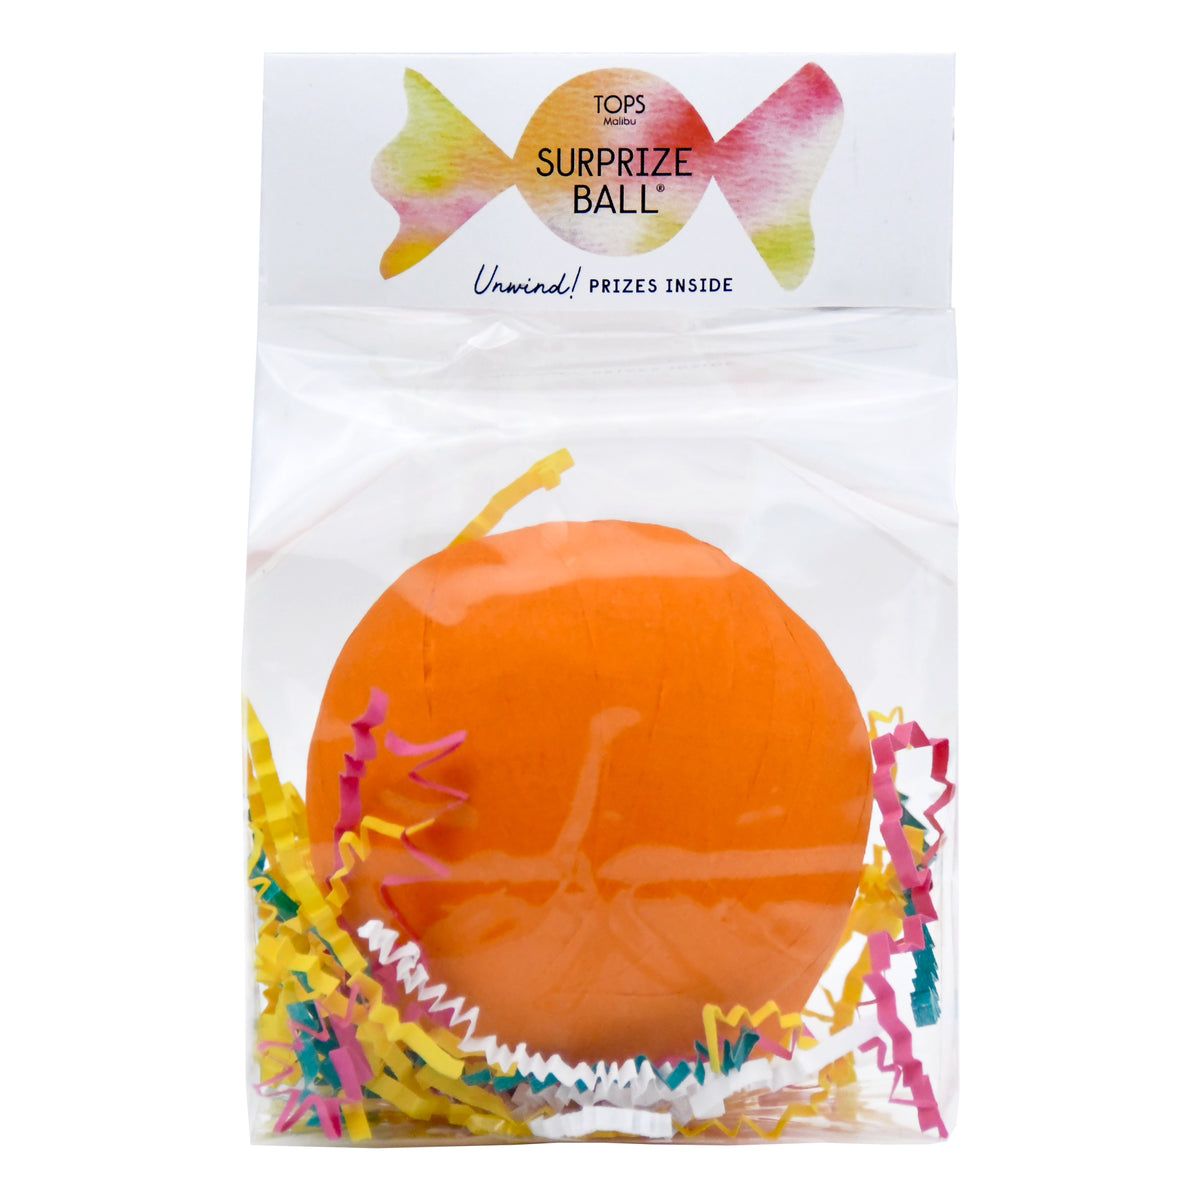 Deluxe Surprize Ball in a bag